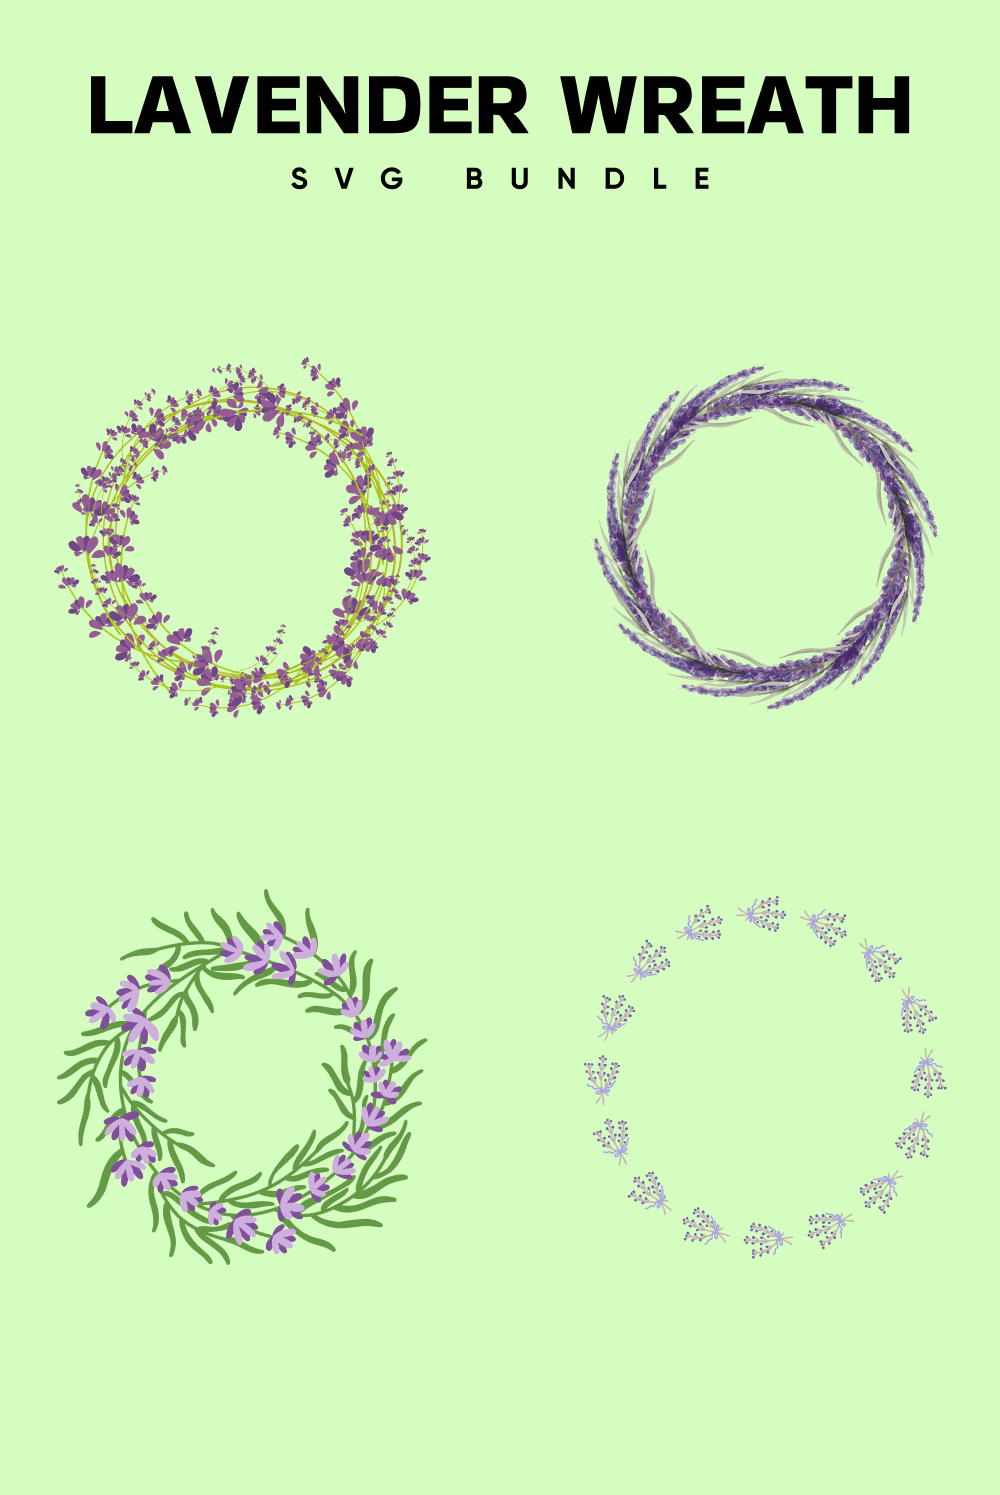 Wreaths of lavender flowers only, as well as flowers and leaves.